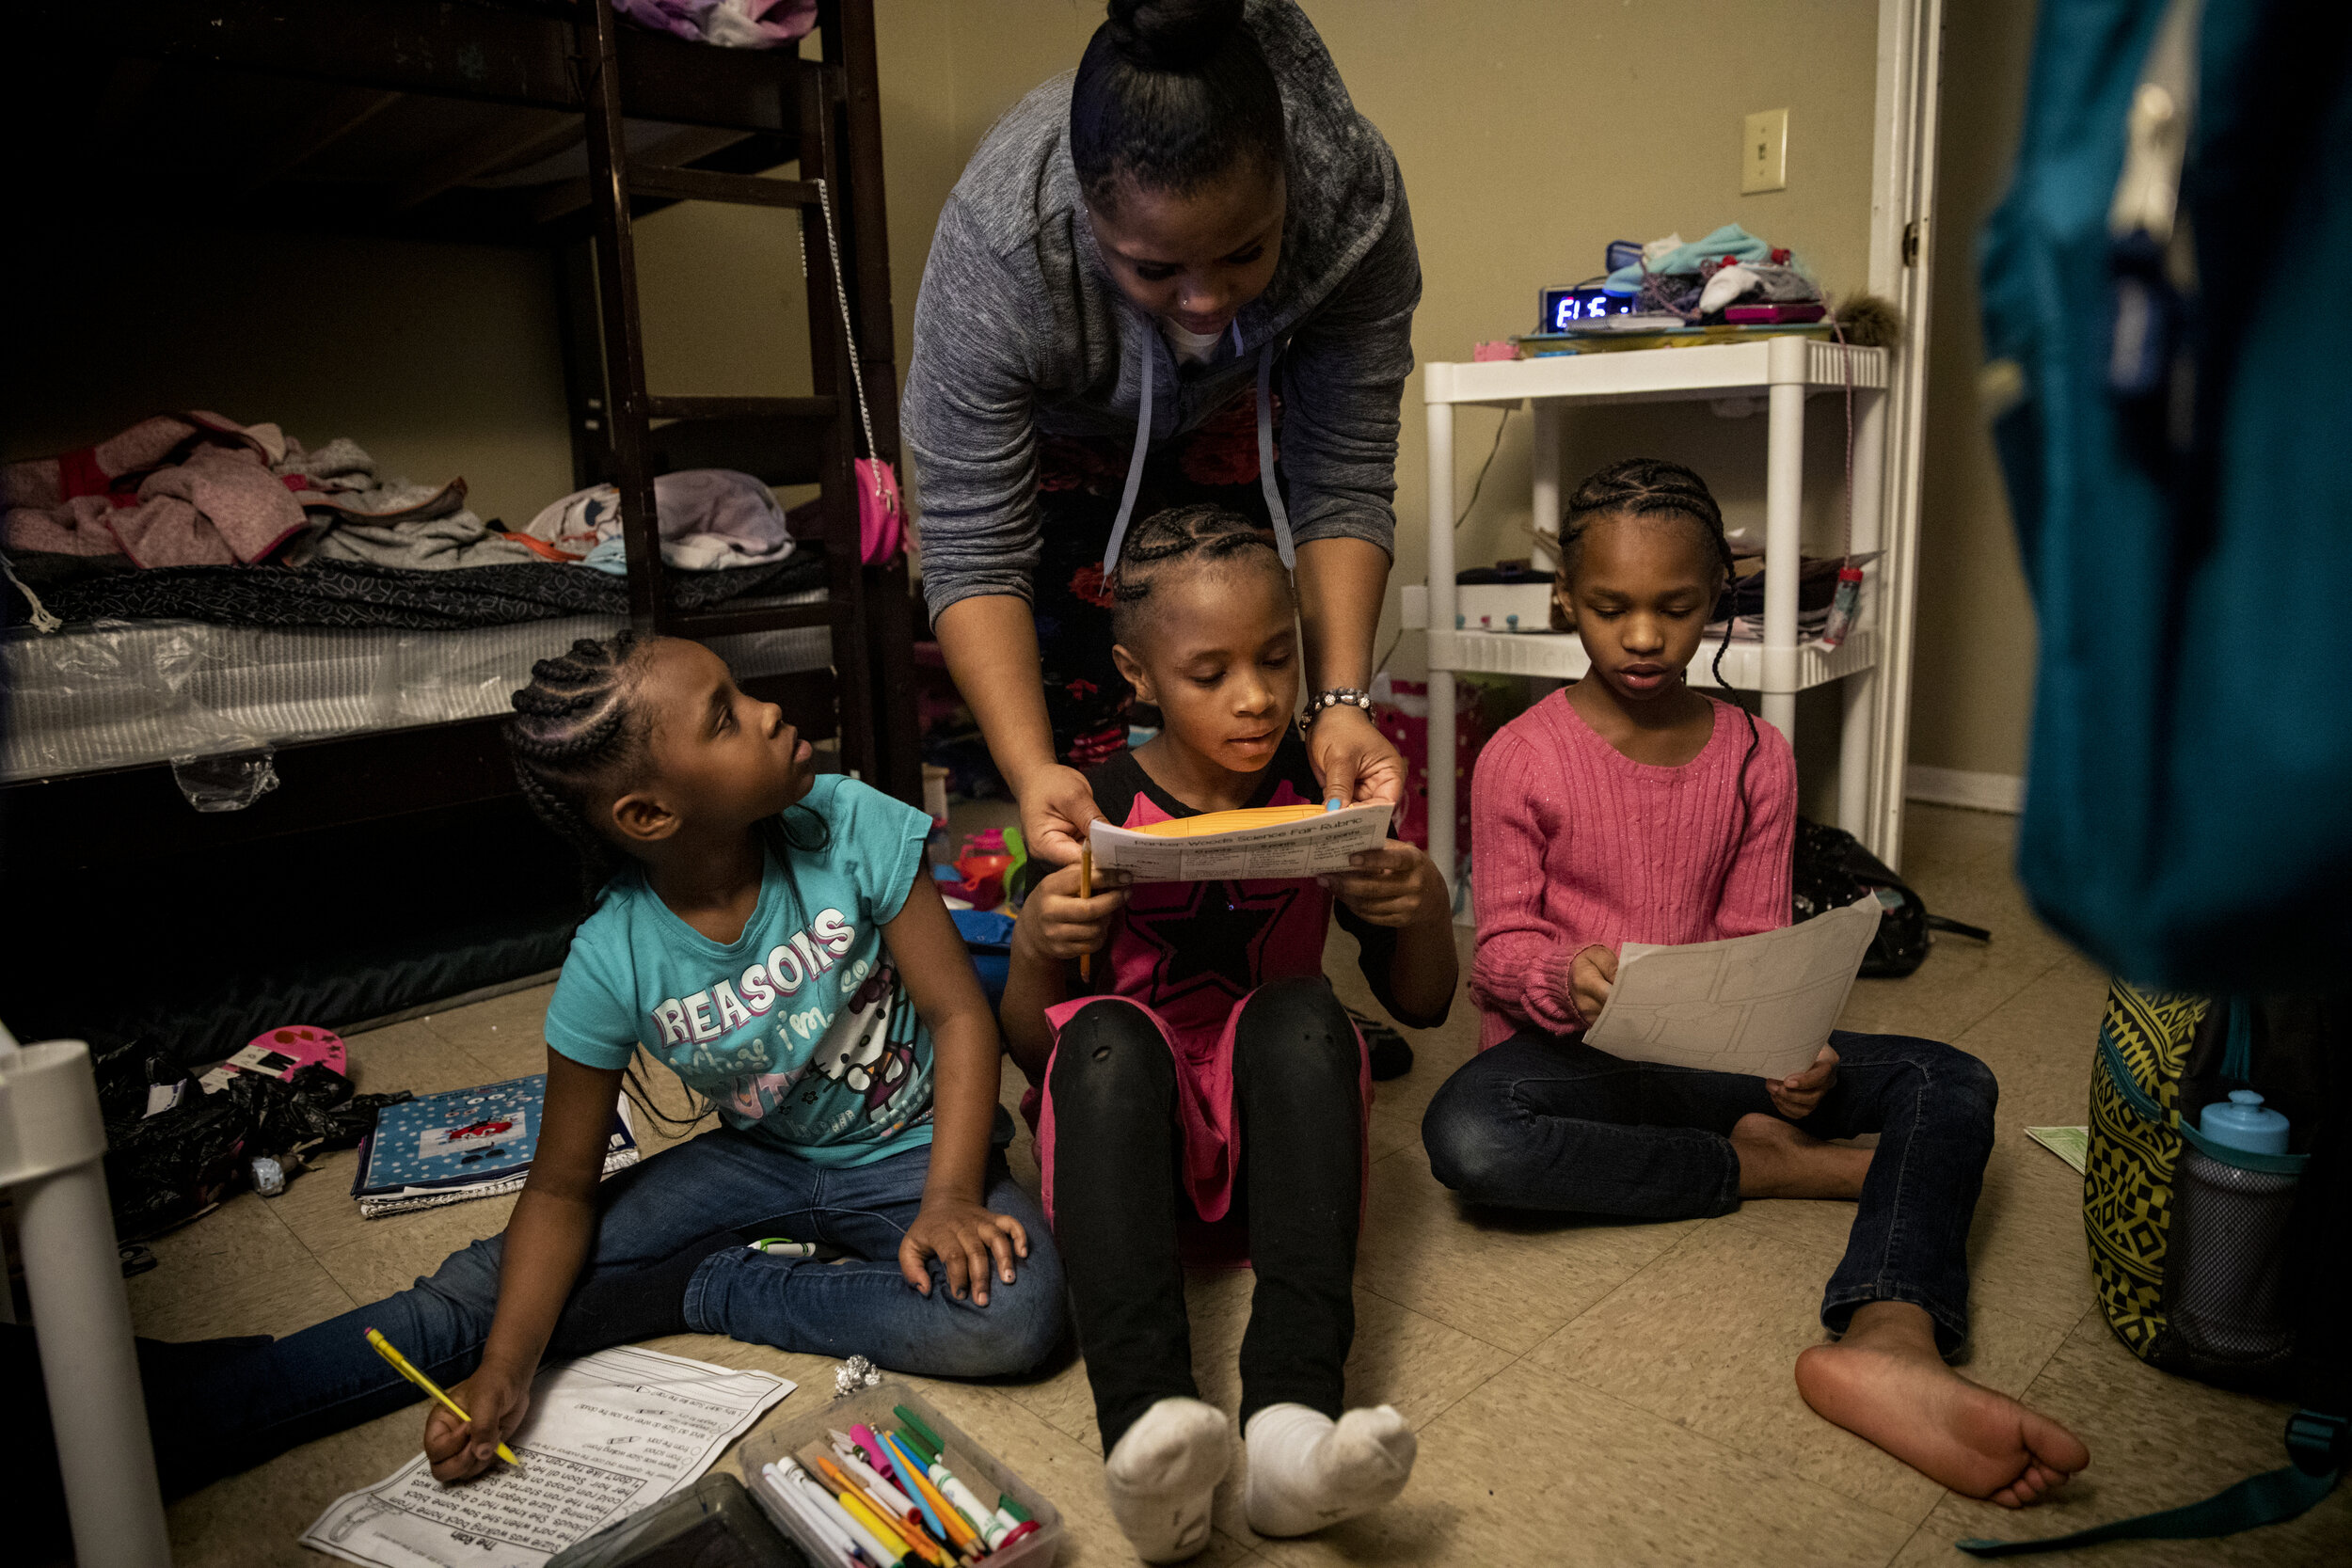  Paige Berry helps her three daughters Angelina, 7, Ajaunae, 8, and Amariyonna, 9, with their homework in the girls' bedroom in their basement apartment.&nbsp; 